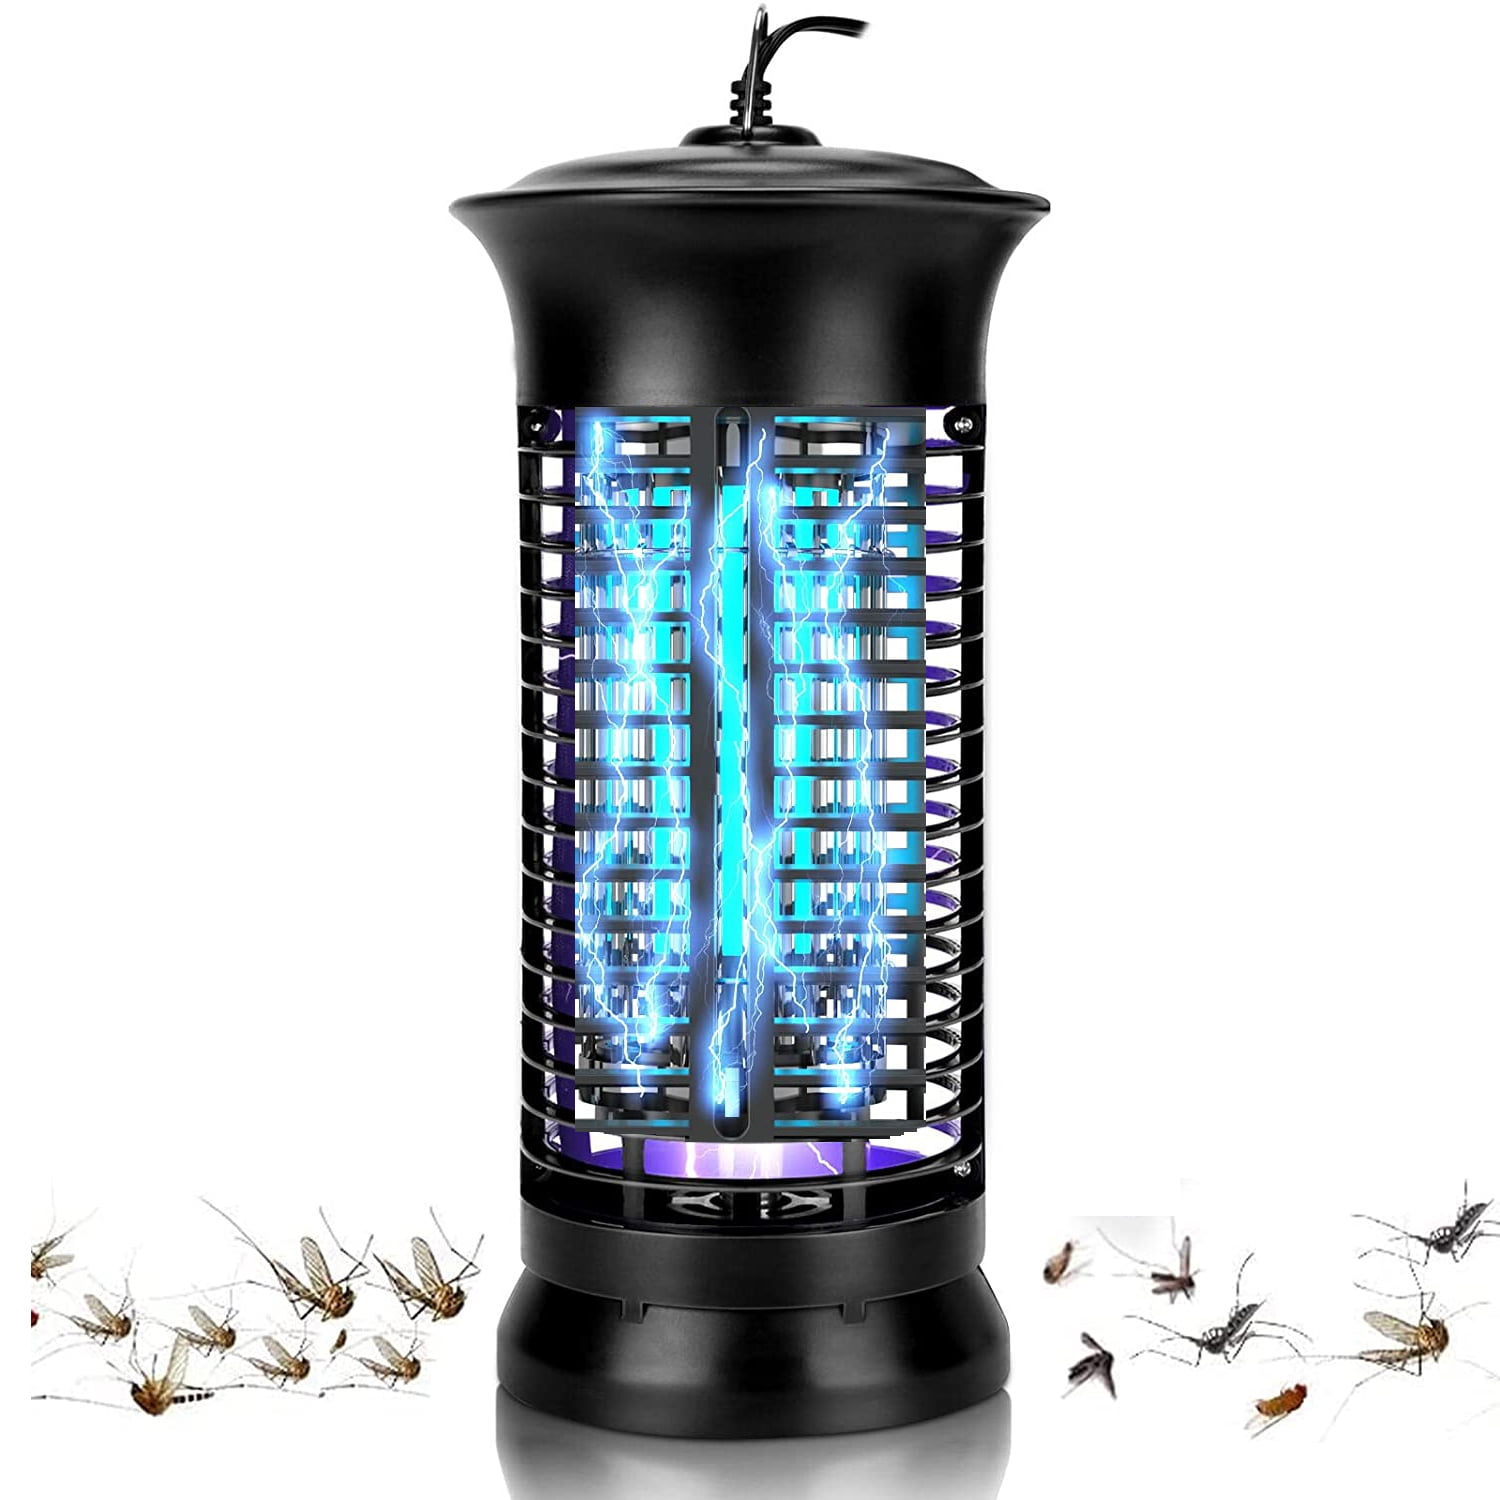 YISSVIC Bug Zapper Outdoor Indoor Waterproof Electric Mosquito Zapper Use Effective 4000V for Home Patio Office Courtyard